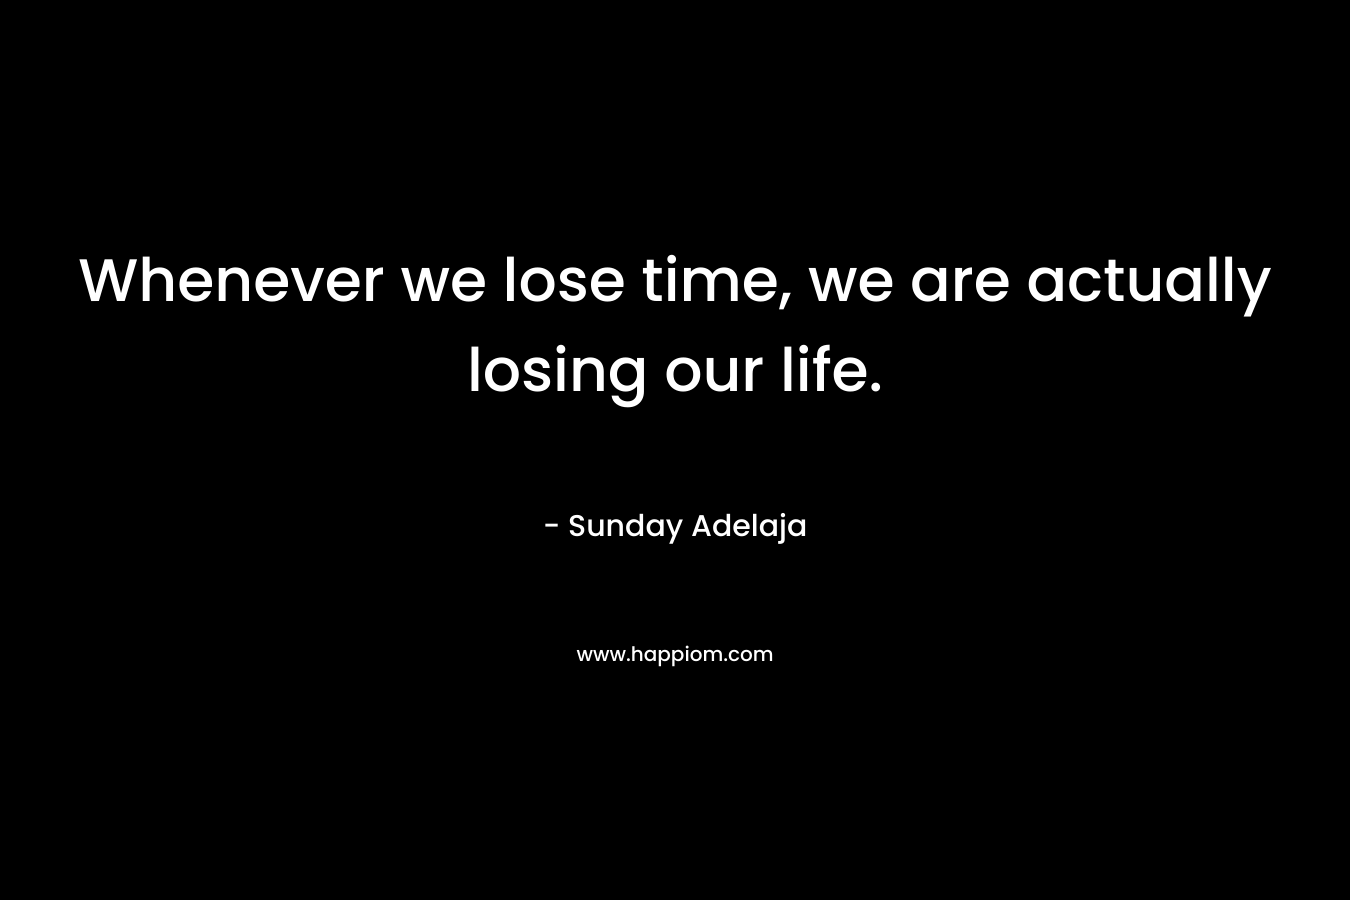 Whenever we lose time, we are actually losing our life.